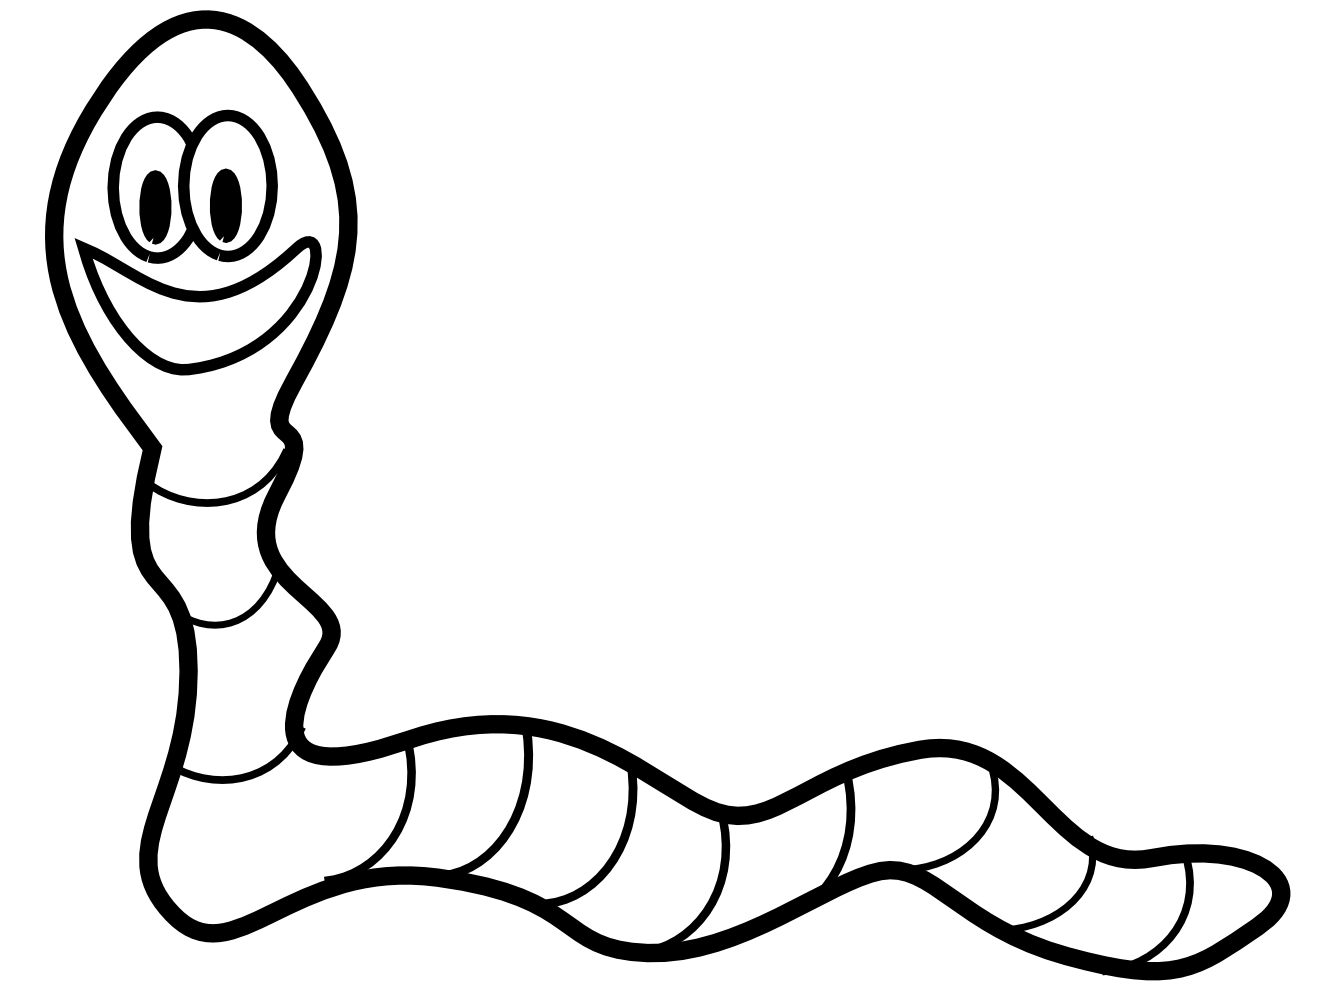 15 Worm Clip Art Free Cliparts That You Can Download To You Computer